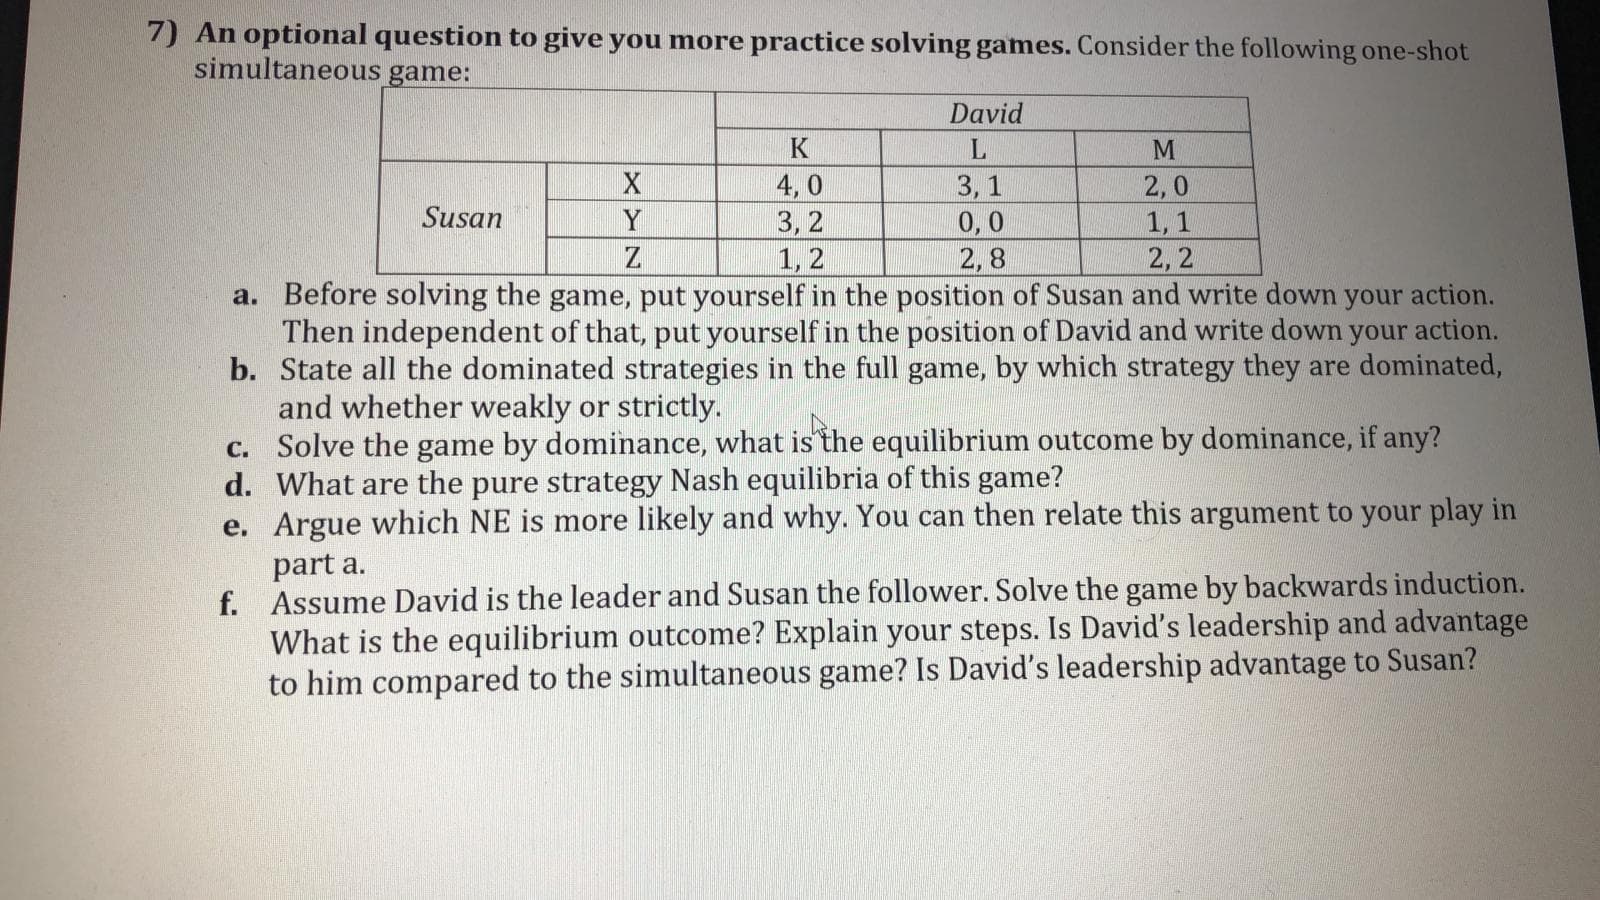 An optional question to give you more practice solving games. Consider the following one-shot
simultaneous game:
David
K
L
3, 1
0,0
2,8
4, 0
3, 2
1, 2
a. Before solving the game, put yourself in the position of Susan and write down your action.
Then independent of that, put yourself in the position of David and write down your action.
b. State all the dominated strategies in the full game, by which strategy they are dominated,
2,0
1, 1
2,2
Susan
Y
and whether weakly or strictly.
c. Solve the game by dominance, what is the equilibrium outcome by dominance, if any?
d. What are the pure strategy Nash equilibria of this game?
e. Argue which NE is more likely and why. You can then relate this argument to your play in
part a.
f. Assume David is the leader and Susan the follower. Solve the game by backwards induction.
What is the equilibrium outcome? Explain your steps. Is David's leadership and advantage
to him compared to the simultaneous game? Is David's leadership advantage to Susan?
